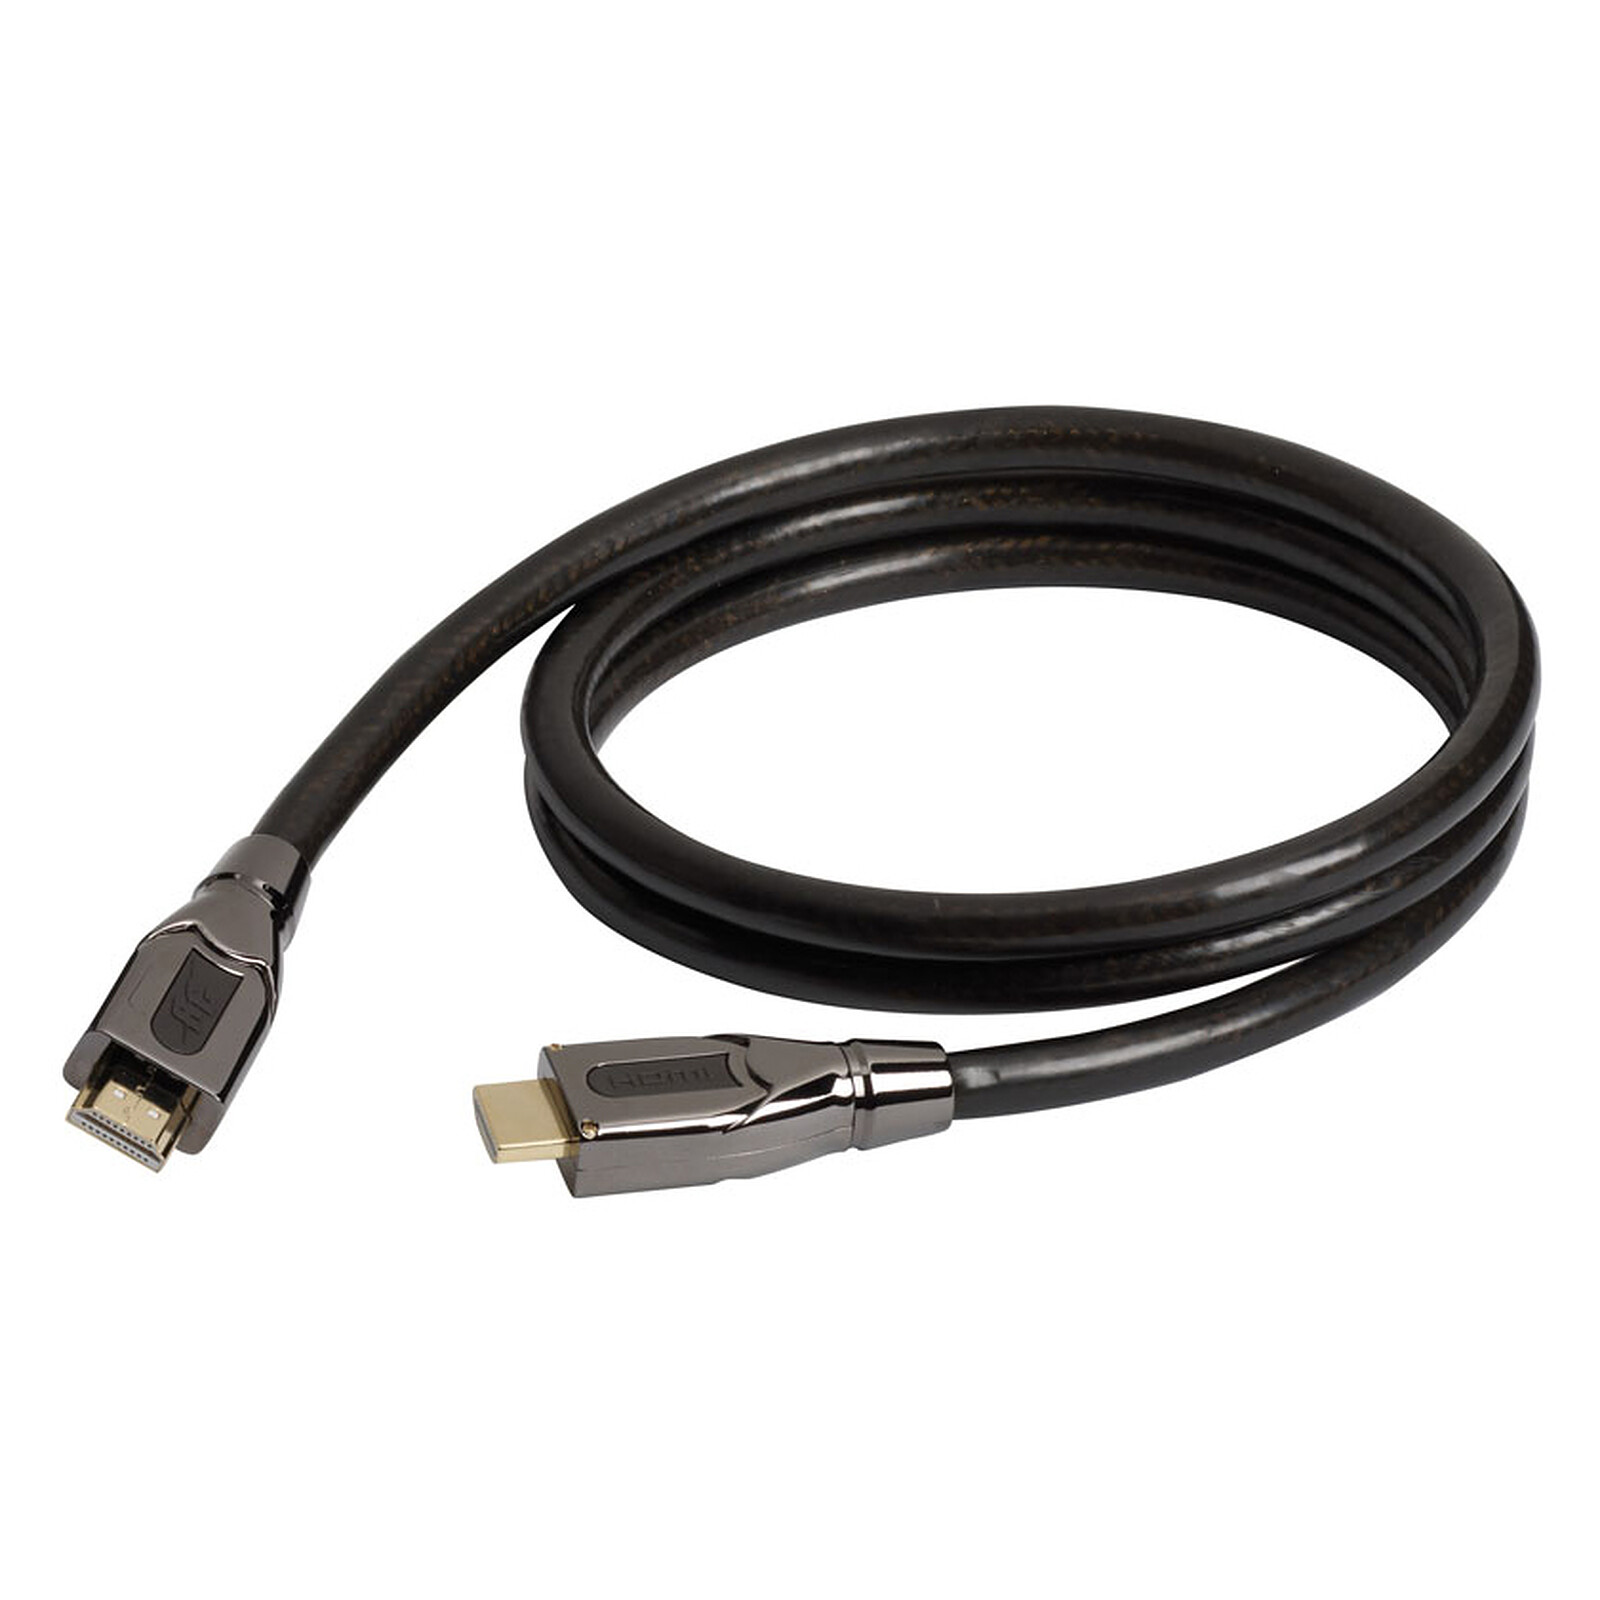 REAL CABLE HD-E-FLAT Câble HDMI Extra Plat Double Blindage Fiche